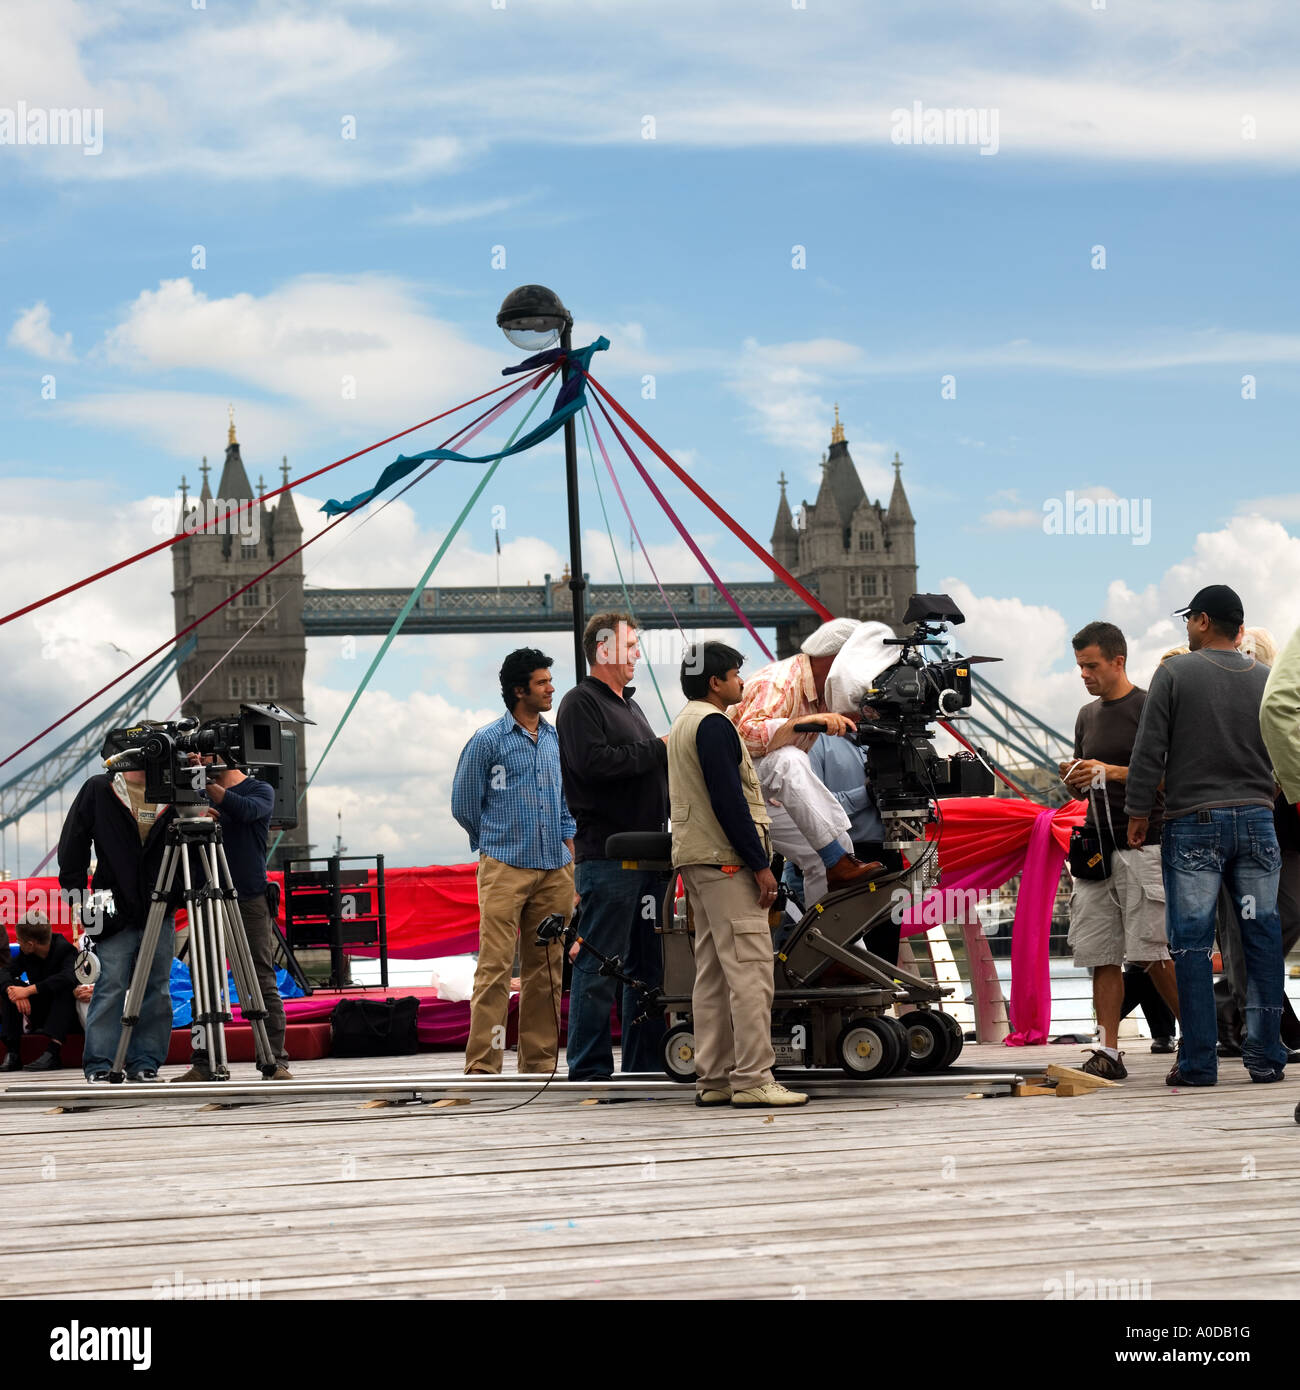 Filming on the set of a Bollywood film in London UK Stock Photo